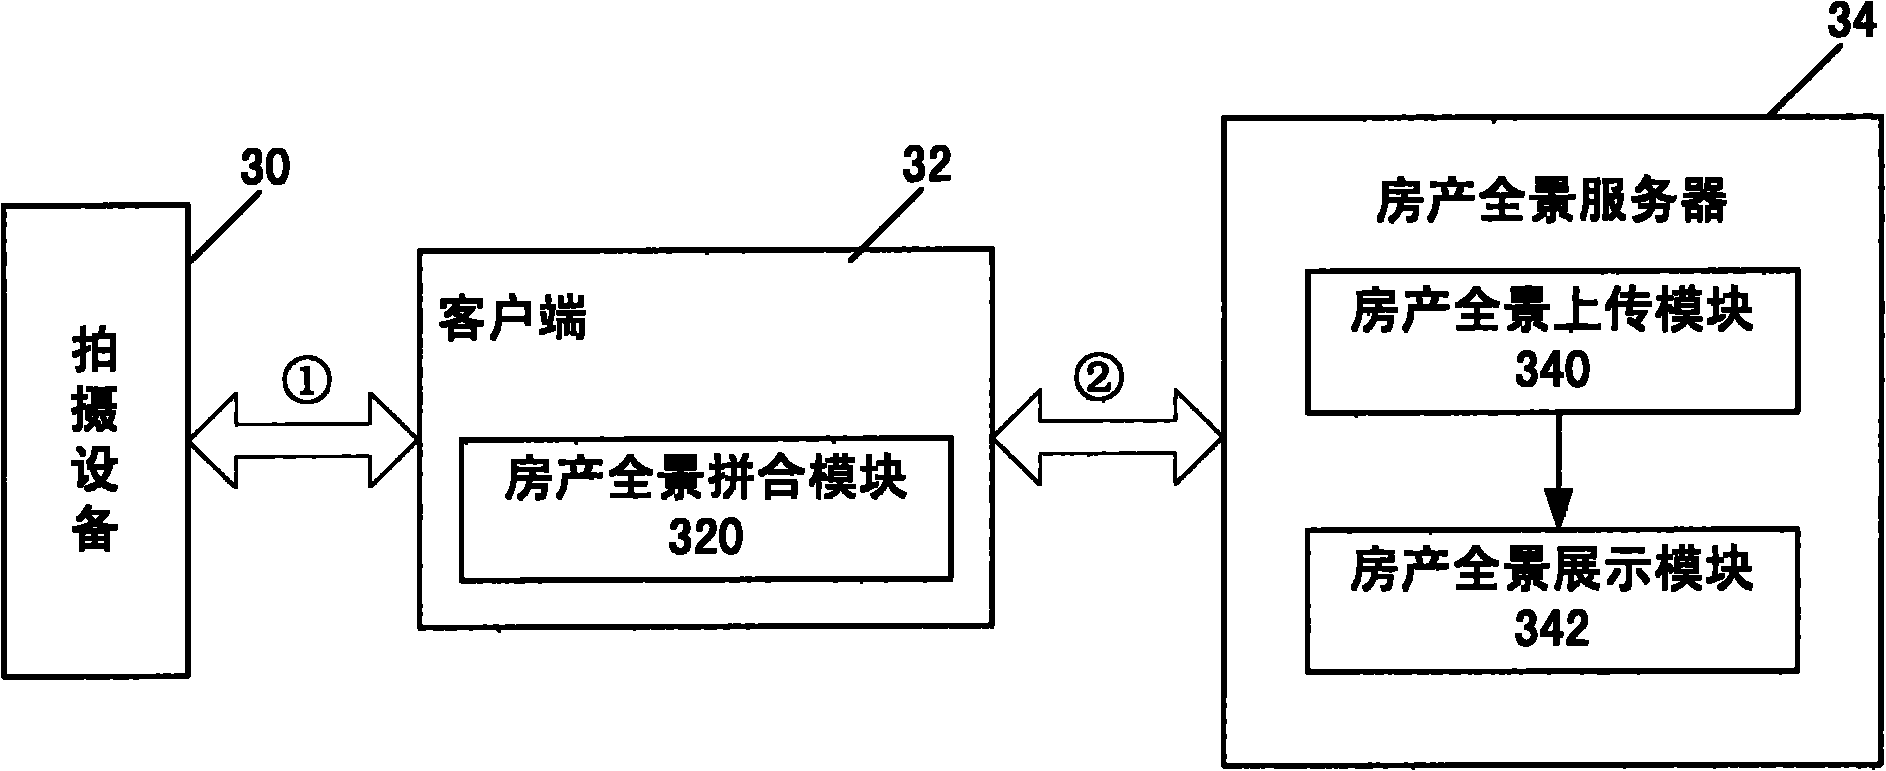 System and method for constructing house property panoramic exhibition by using portable shooting device